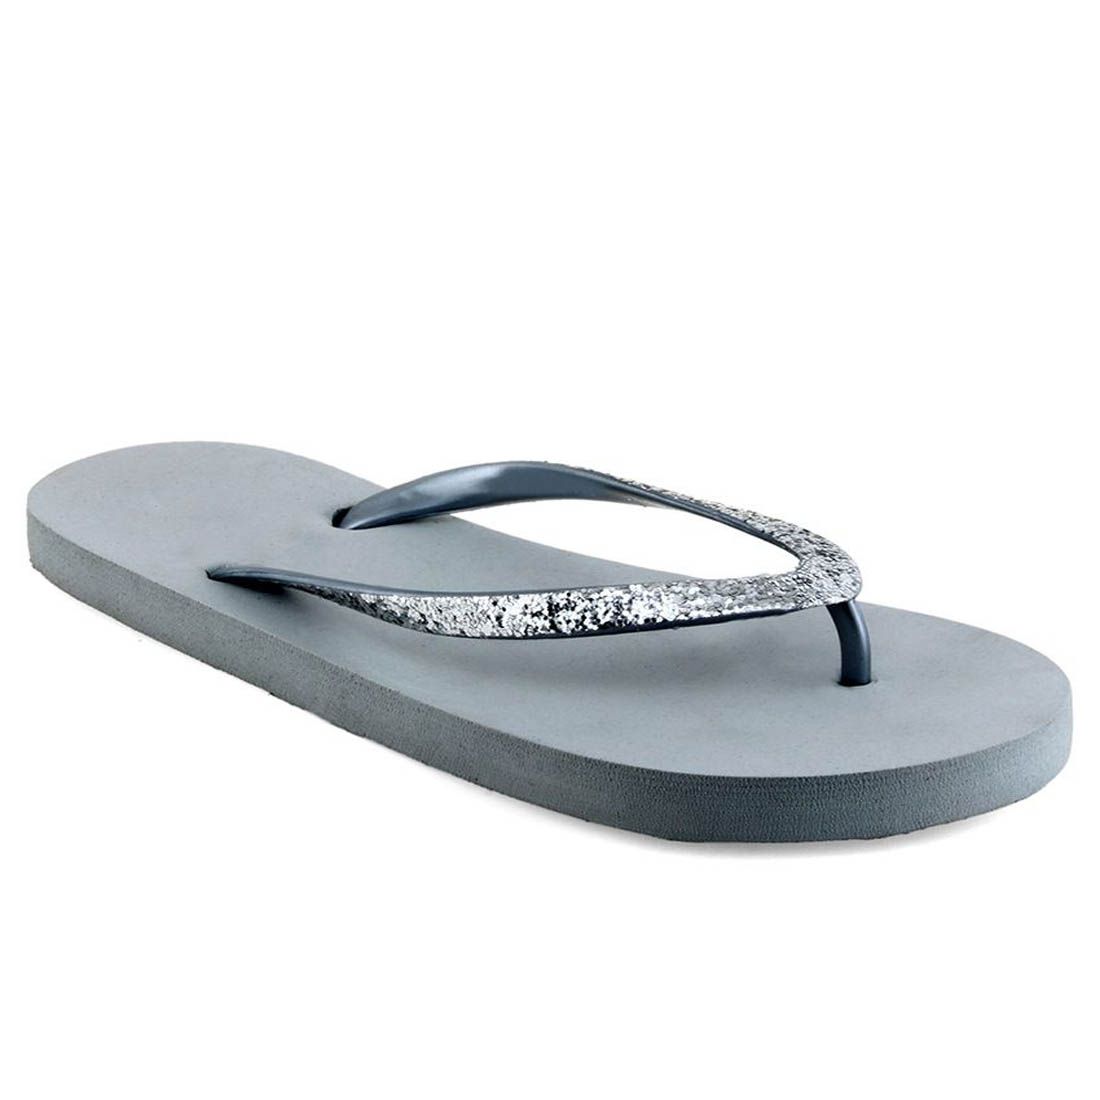 Radhika Silver Slippers Price in India 